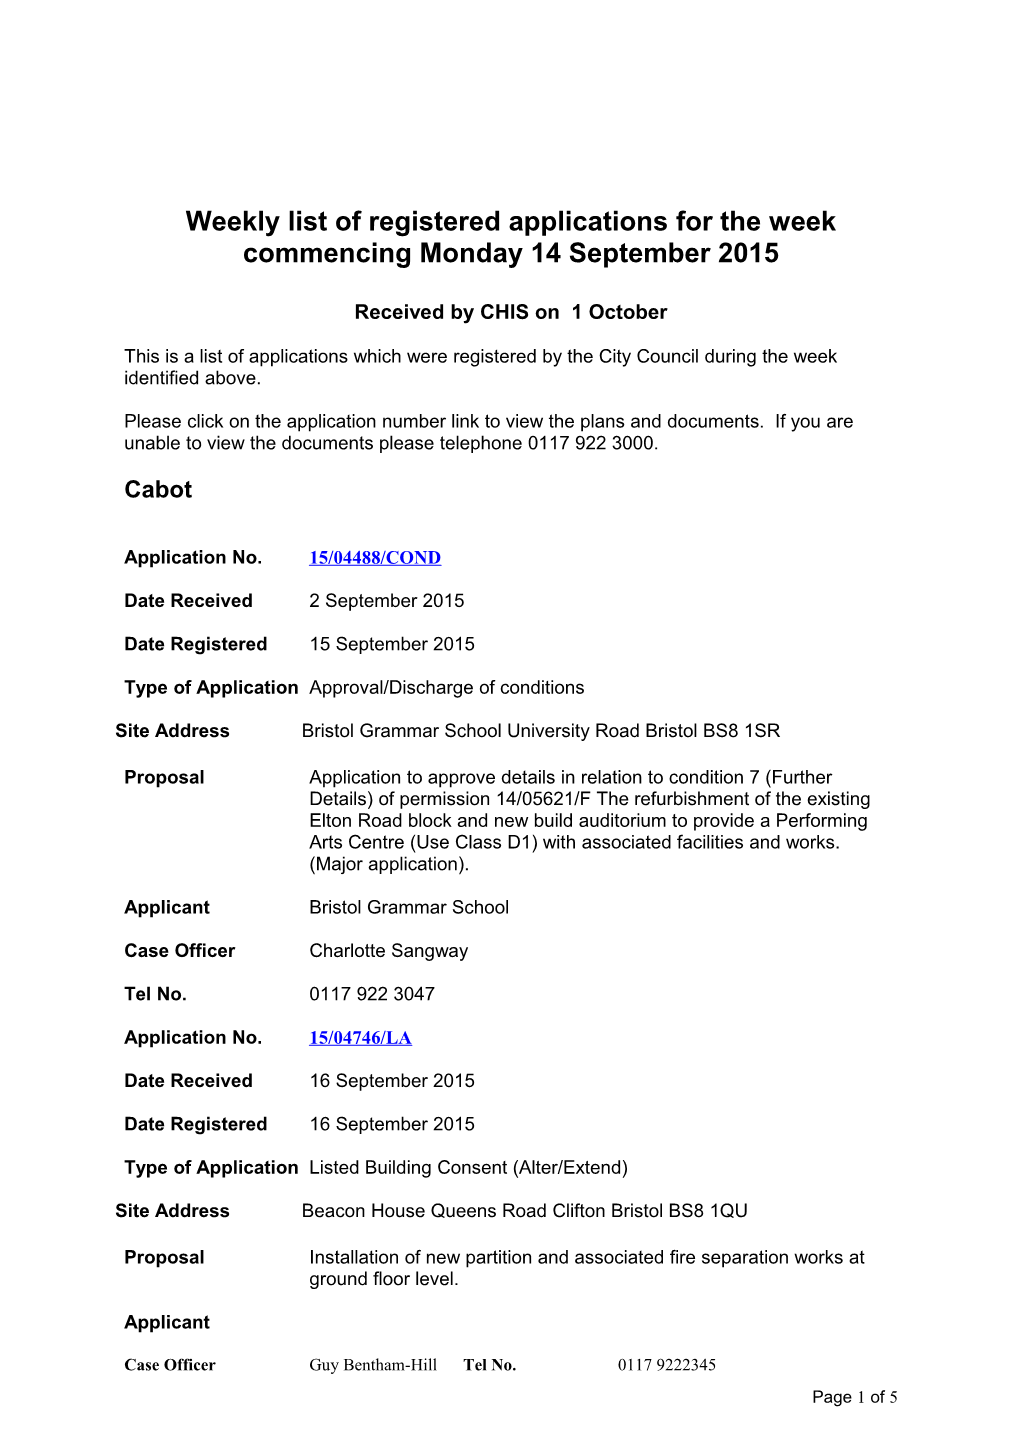 Weekly List of Registered Applications for the Week Commencing Monday 14 September 2015